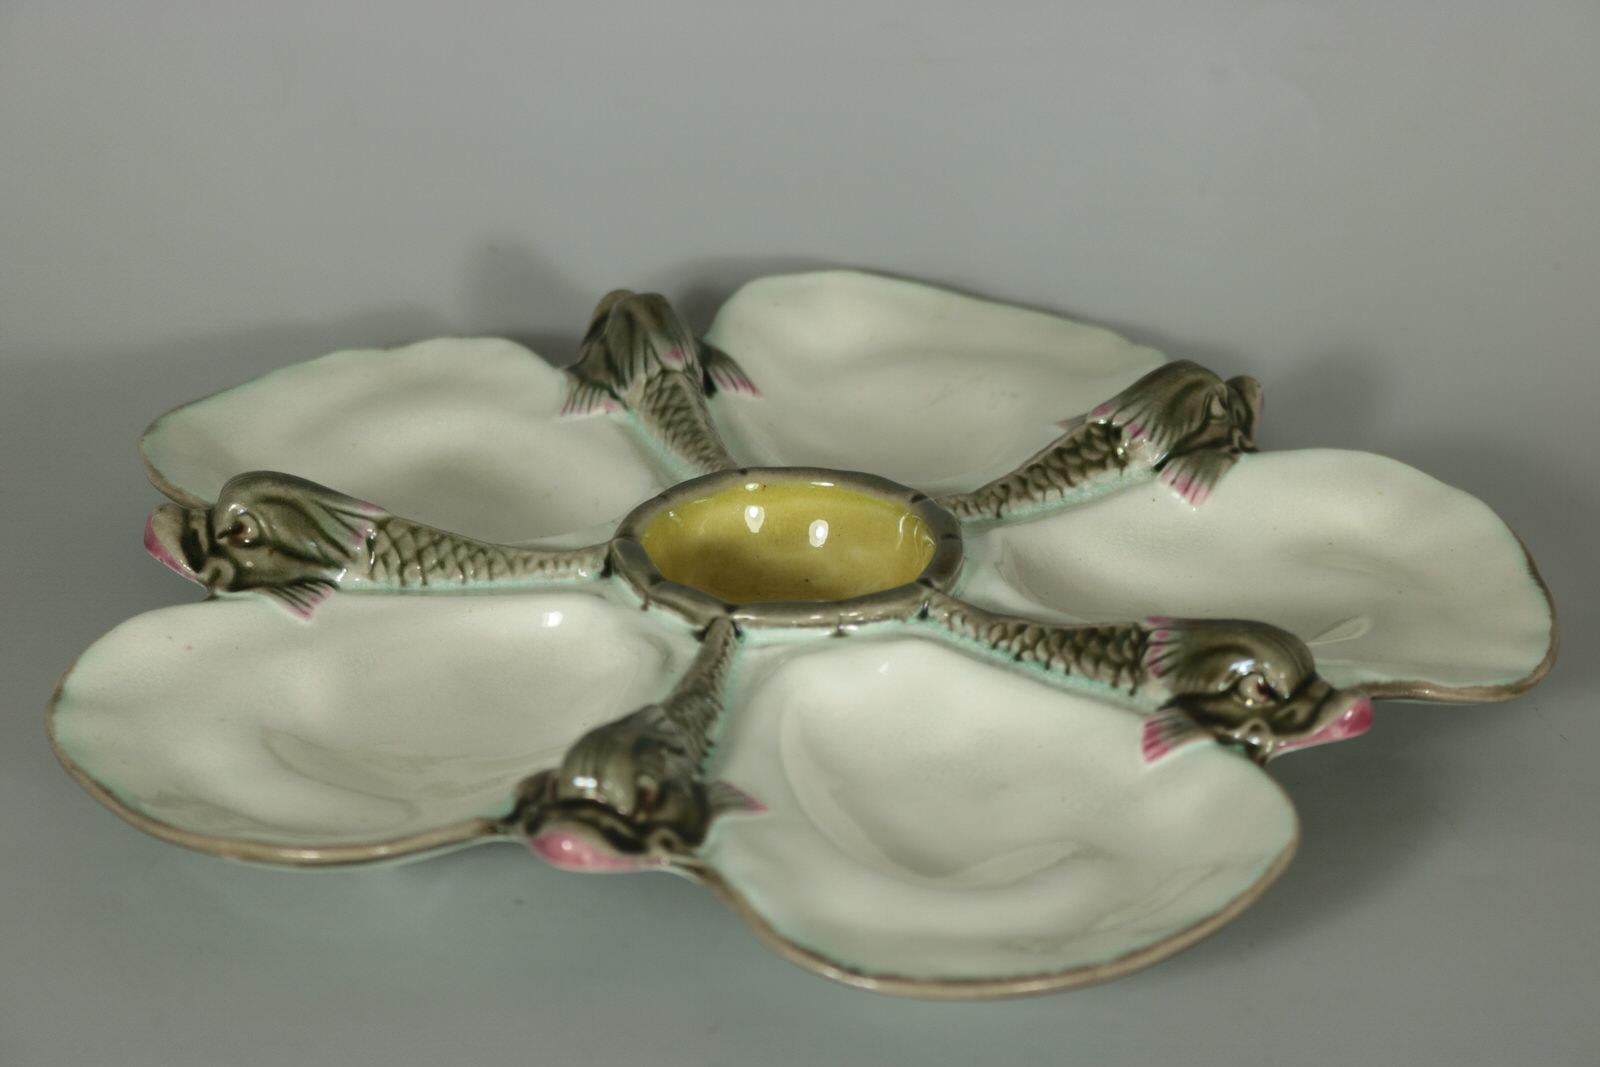 Wedgwood Majolica oyster plate which features five fish around a central well. White ground version. Colouration: white, grey, yellow, are predominant. The piece bears maker's marks for the Wedgwood pottery. Bears a pattern number, '2754'. Marks